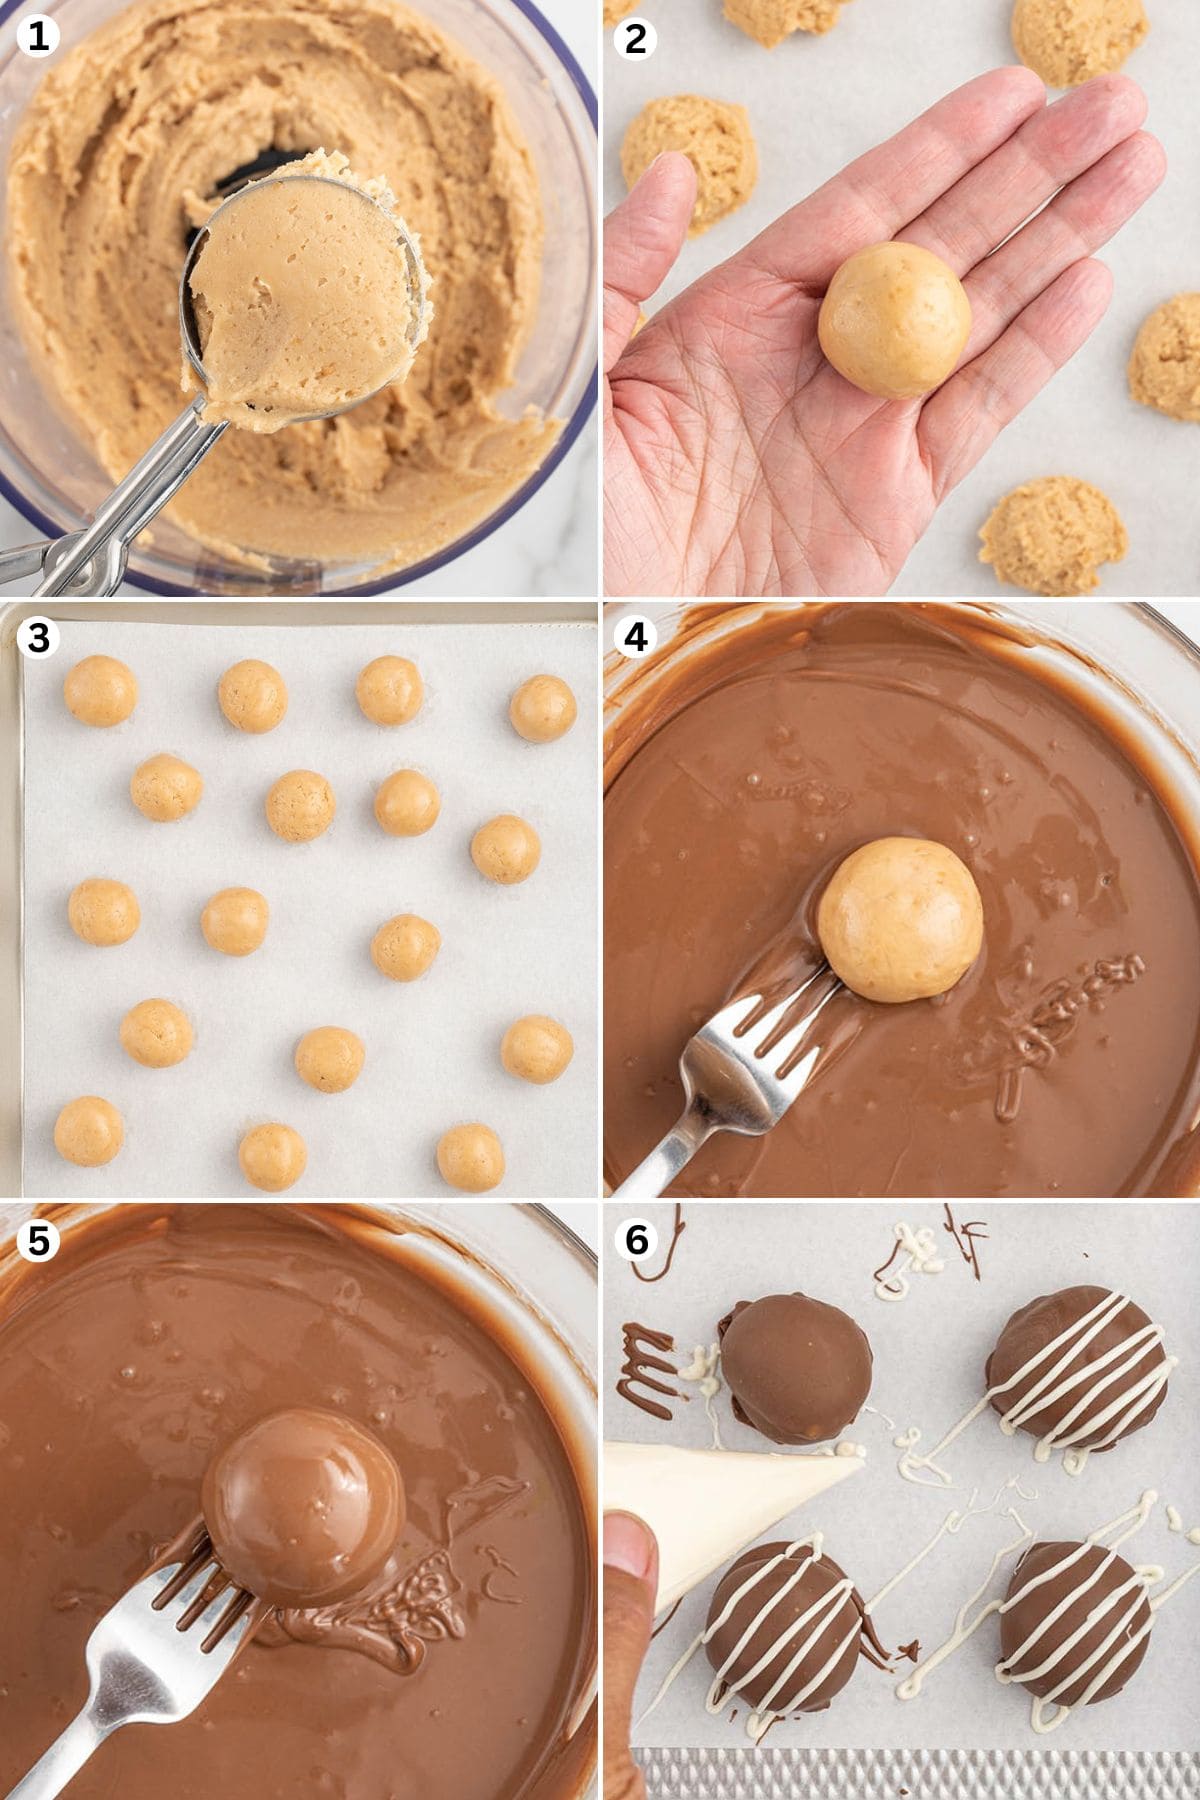 scooping kahlua balls using ice cream scoop. Roll the mixture into balls and line it up in baking sheet. dip into melted chocolate. drizzle with white chocolate.